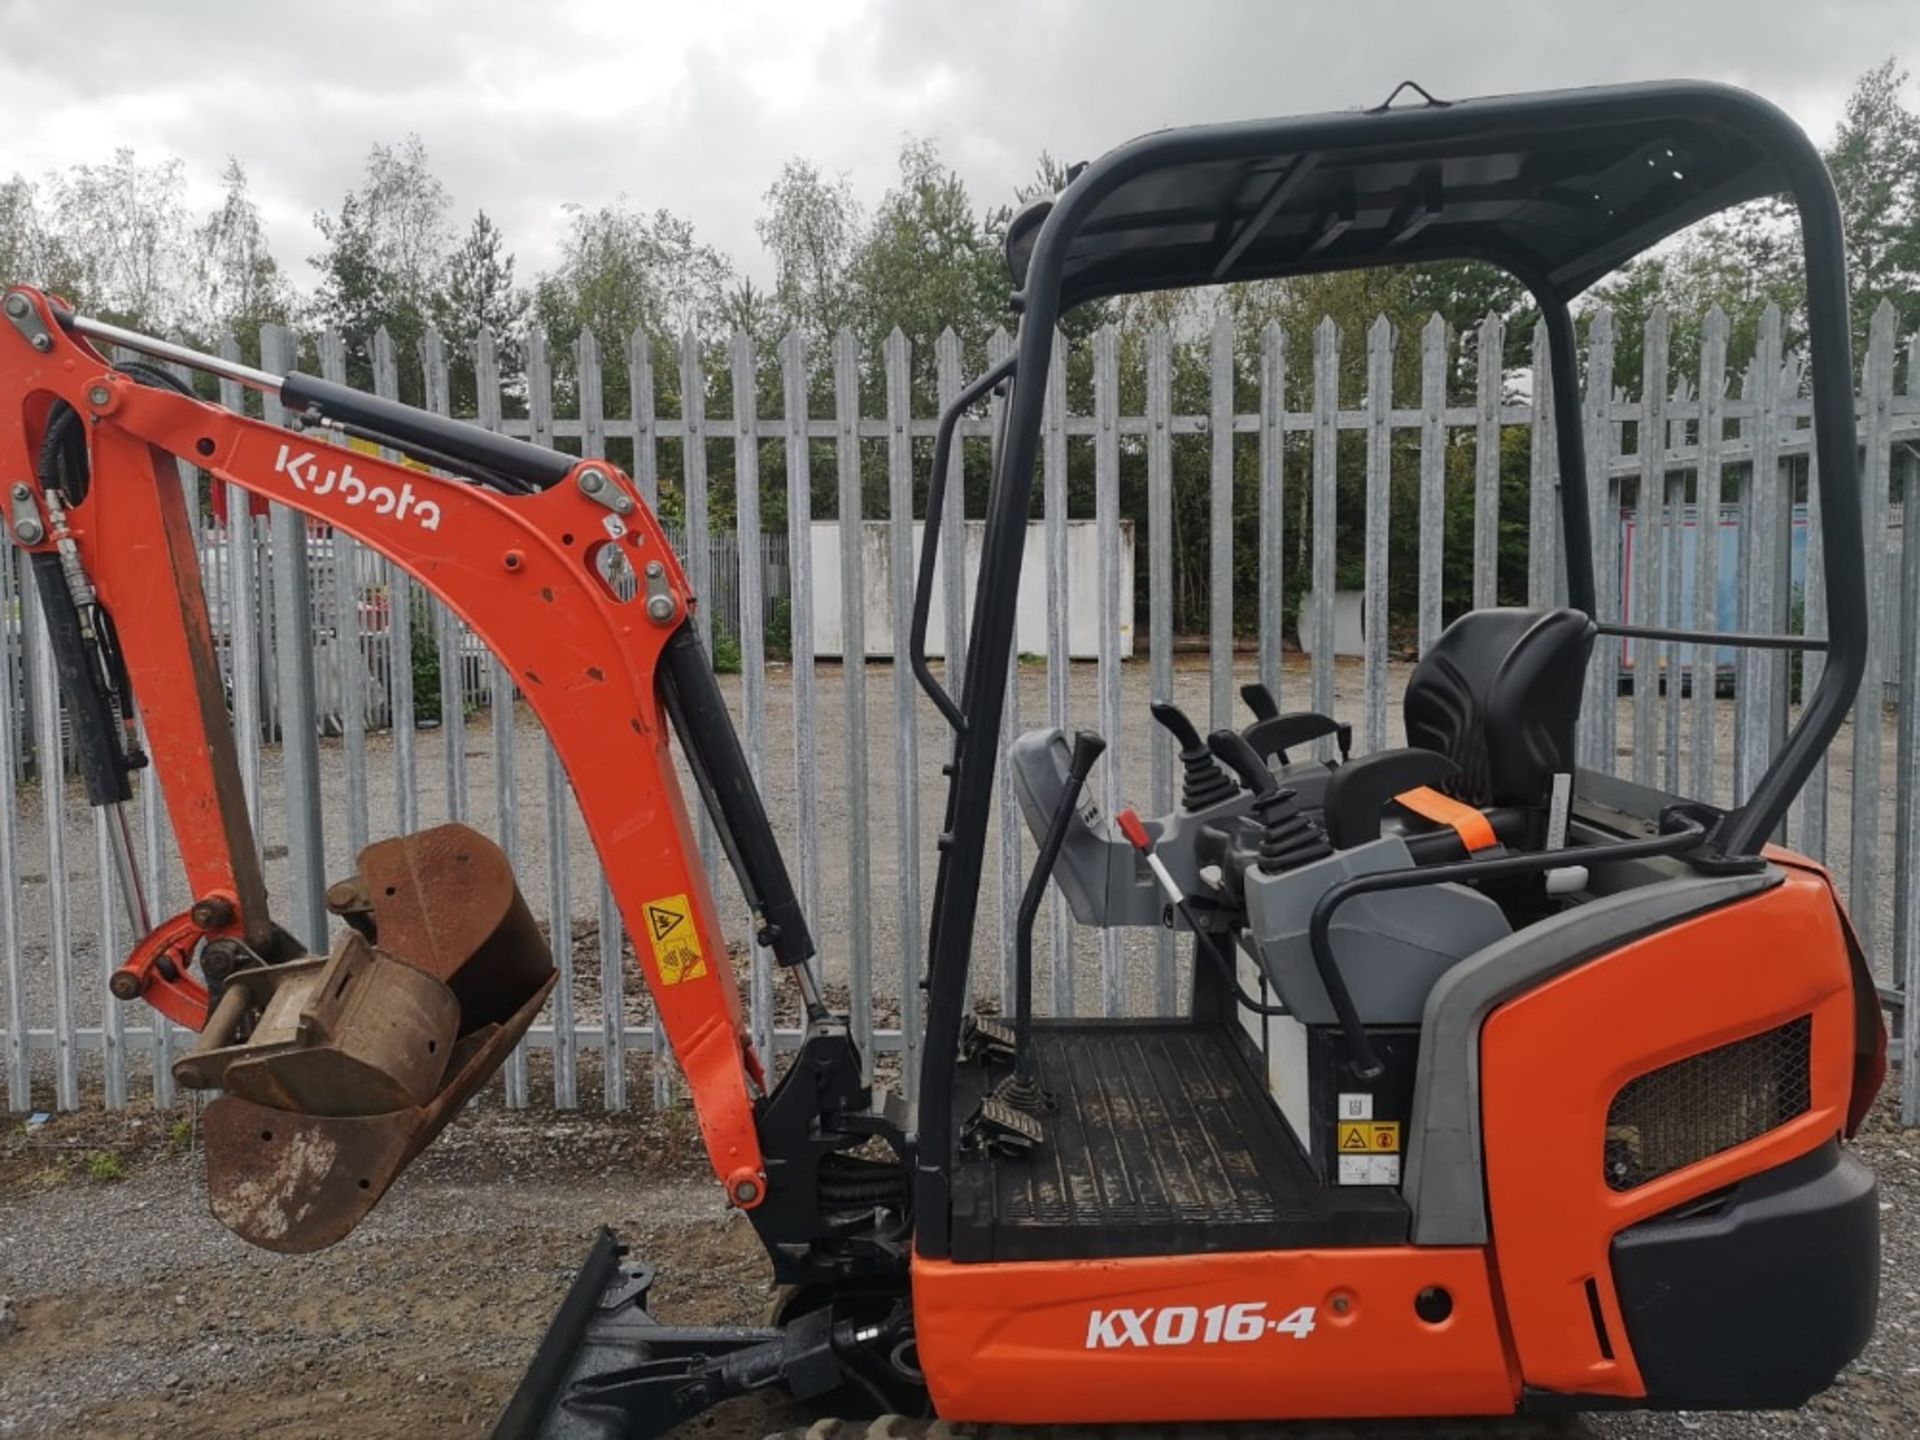 KUBOTA KX016.4 MINIDIGGER C.W 3 BUCKETS, 2015 2178HRS RDD 2 SPEED TRACKING PIPED FOR HAMMER, - Image 2 of 8